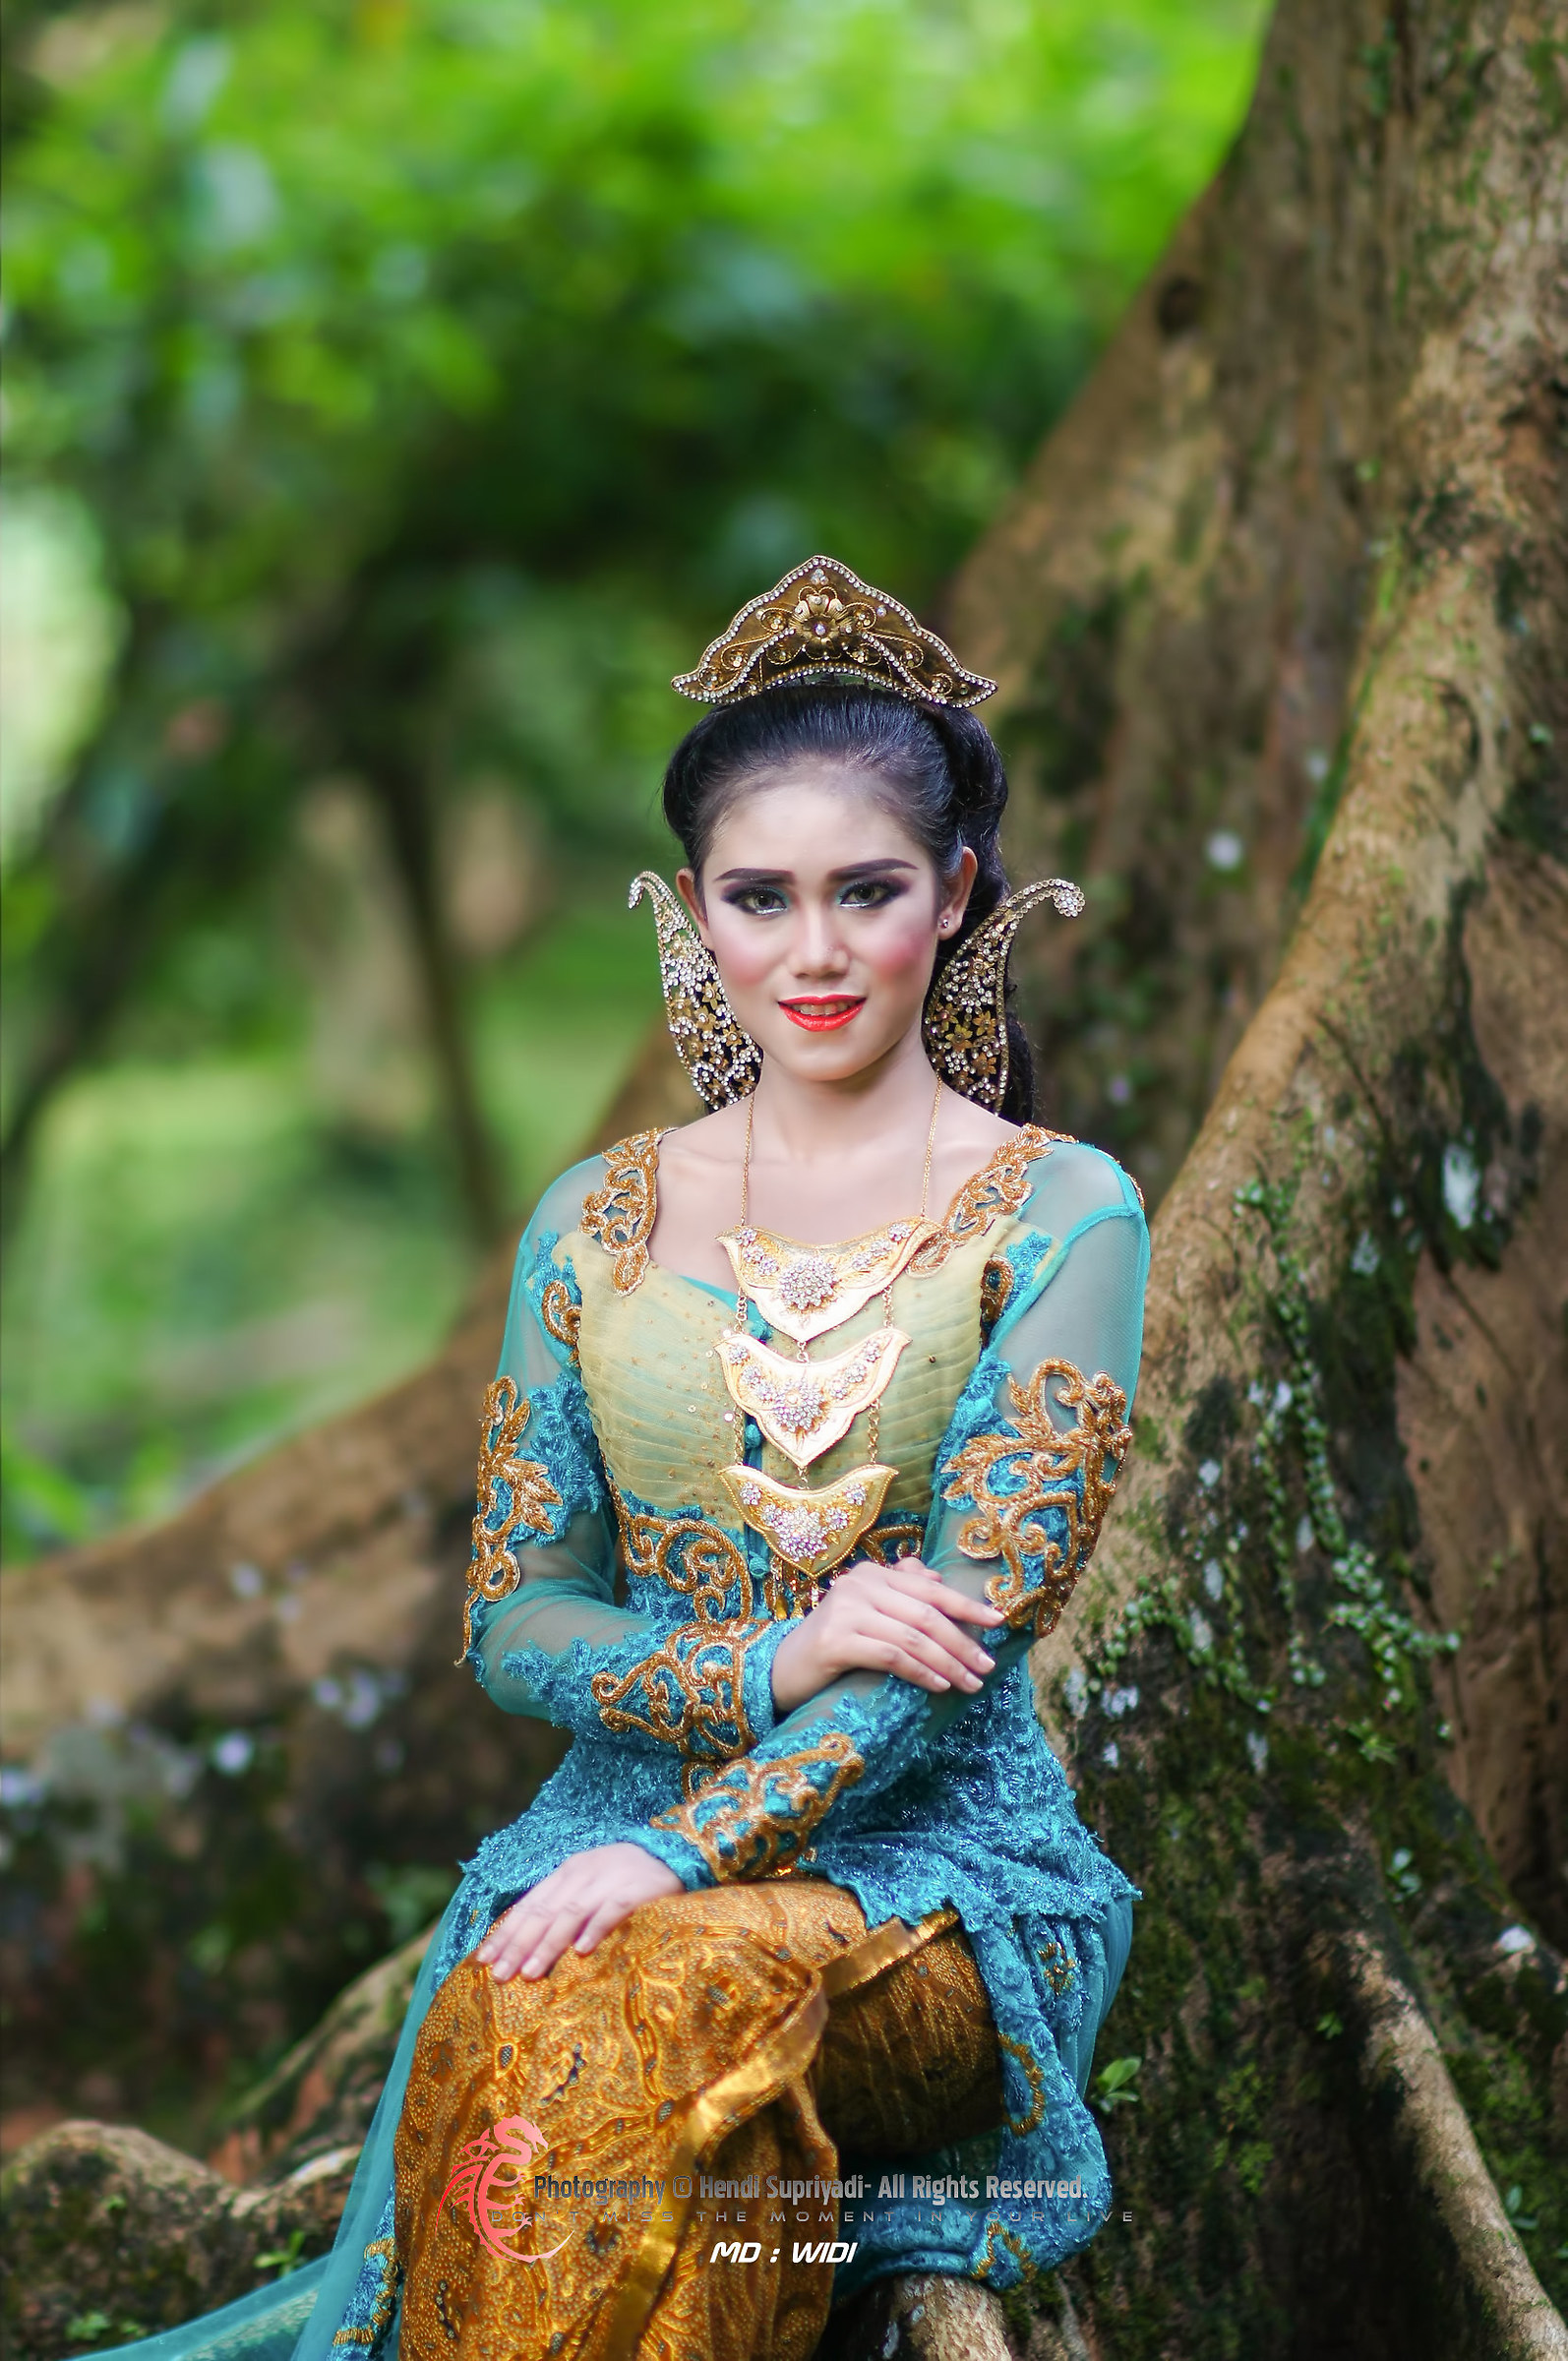 Traditional clothes from indonesia...